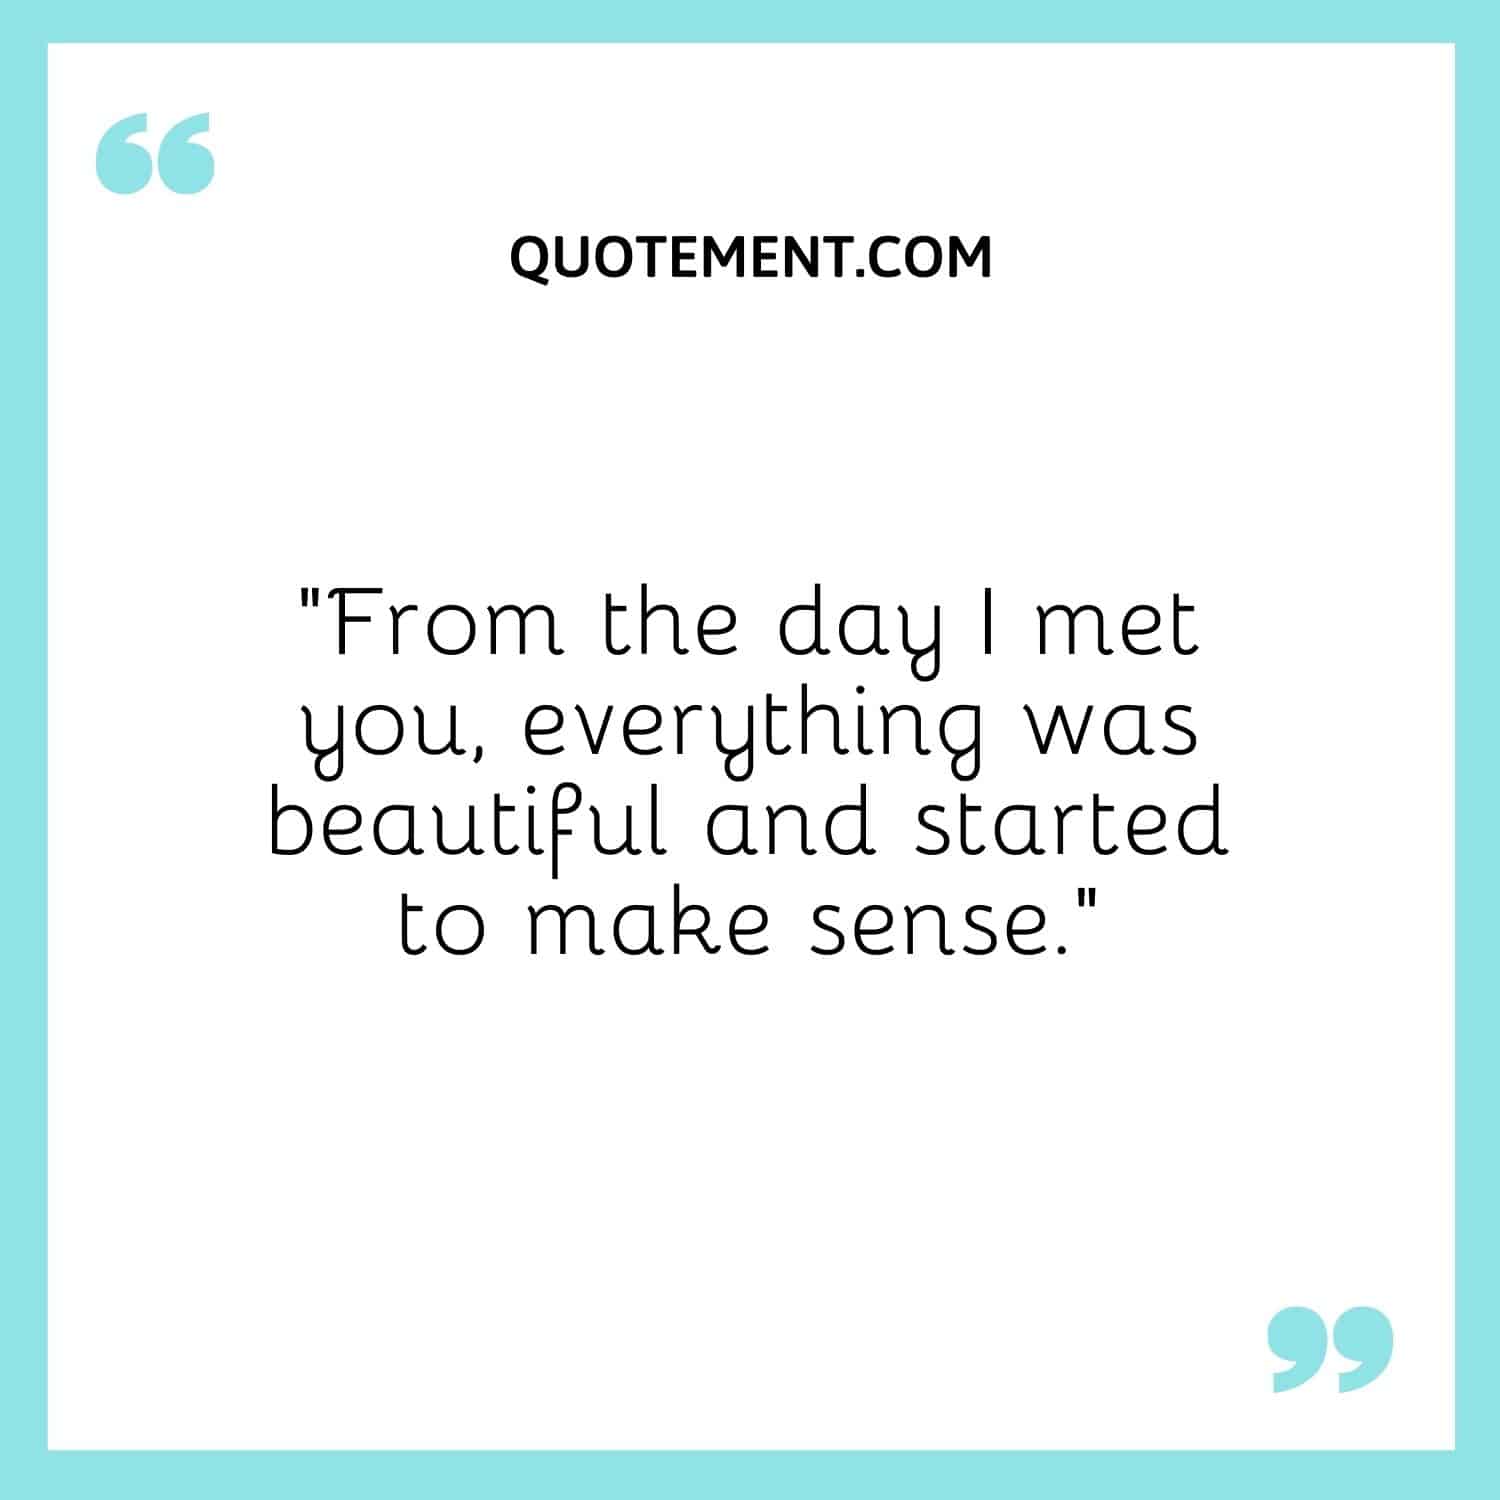 From the day I met you, everything was beautiful and started to make sense.